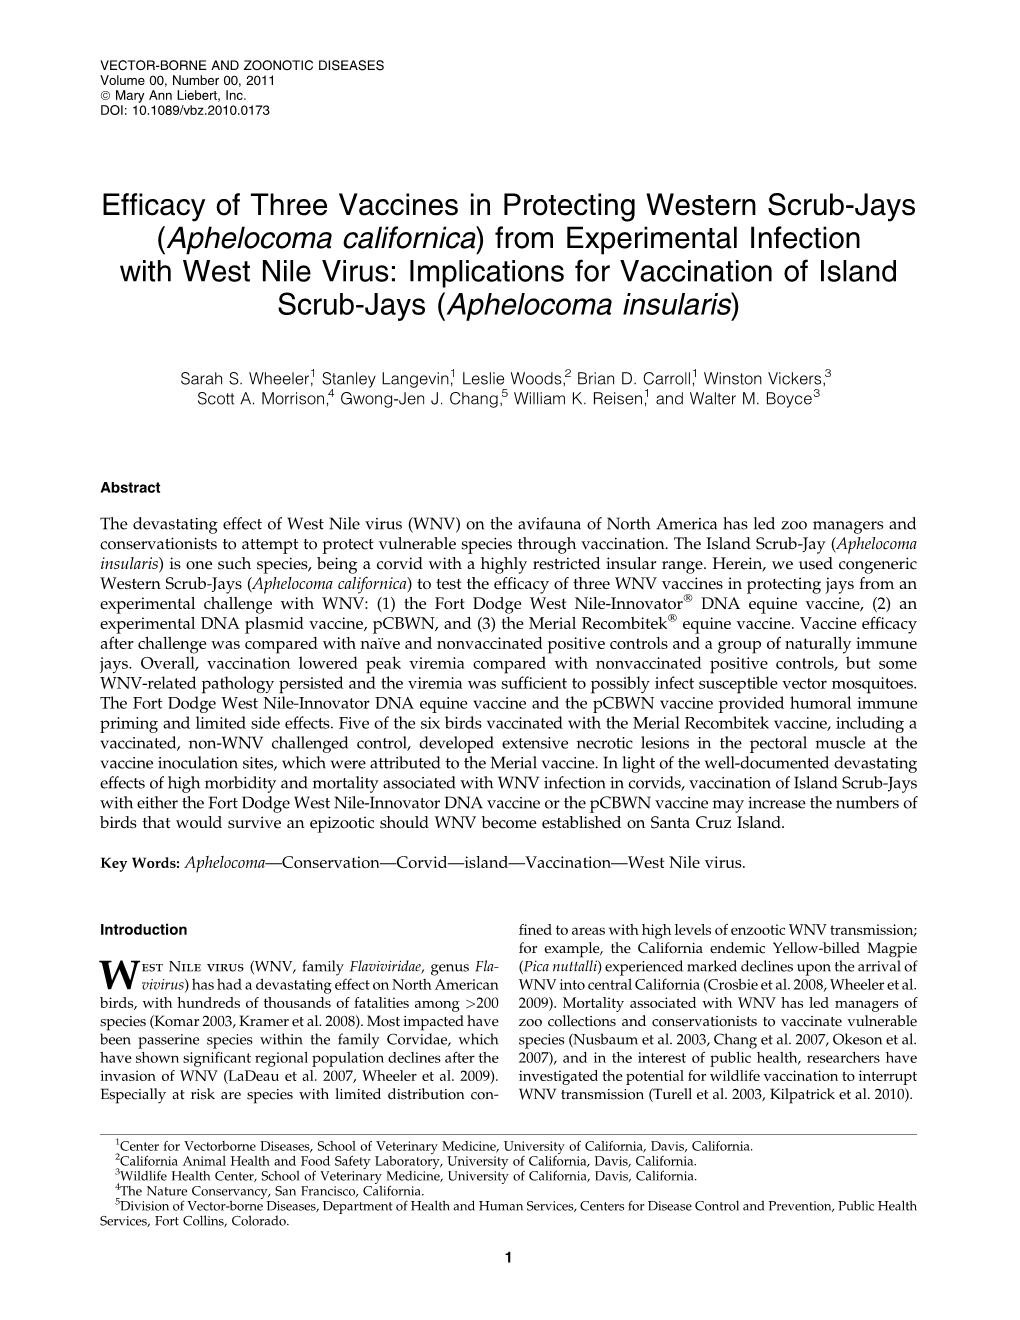 Efficacy of Three Vaccines in Protecting Western Scrub-Jays (Aphelocoma Californica) from Experimental Infection with West Nile